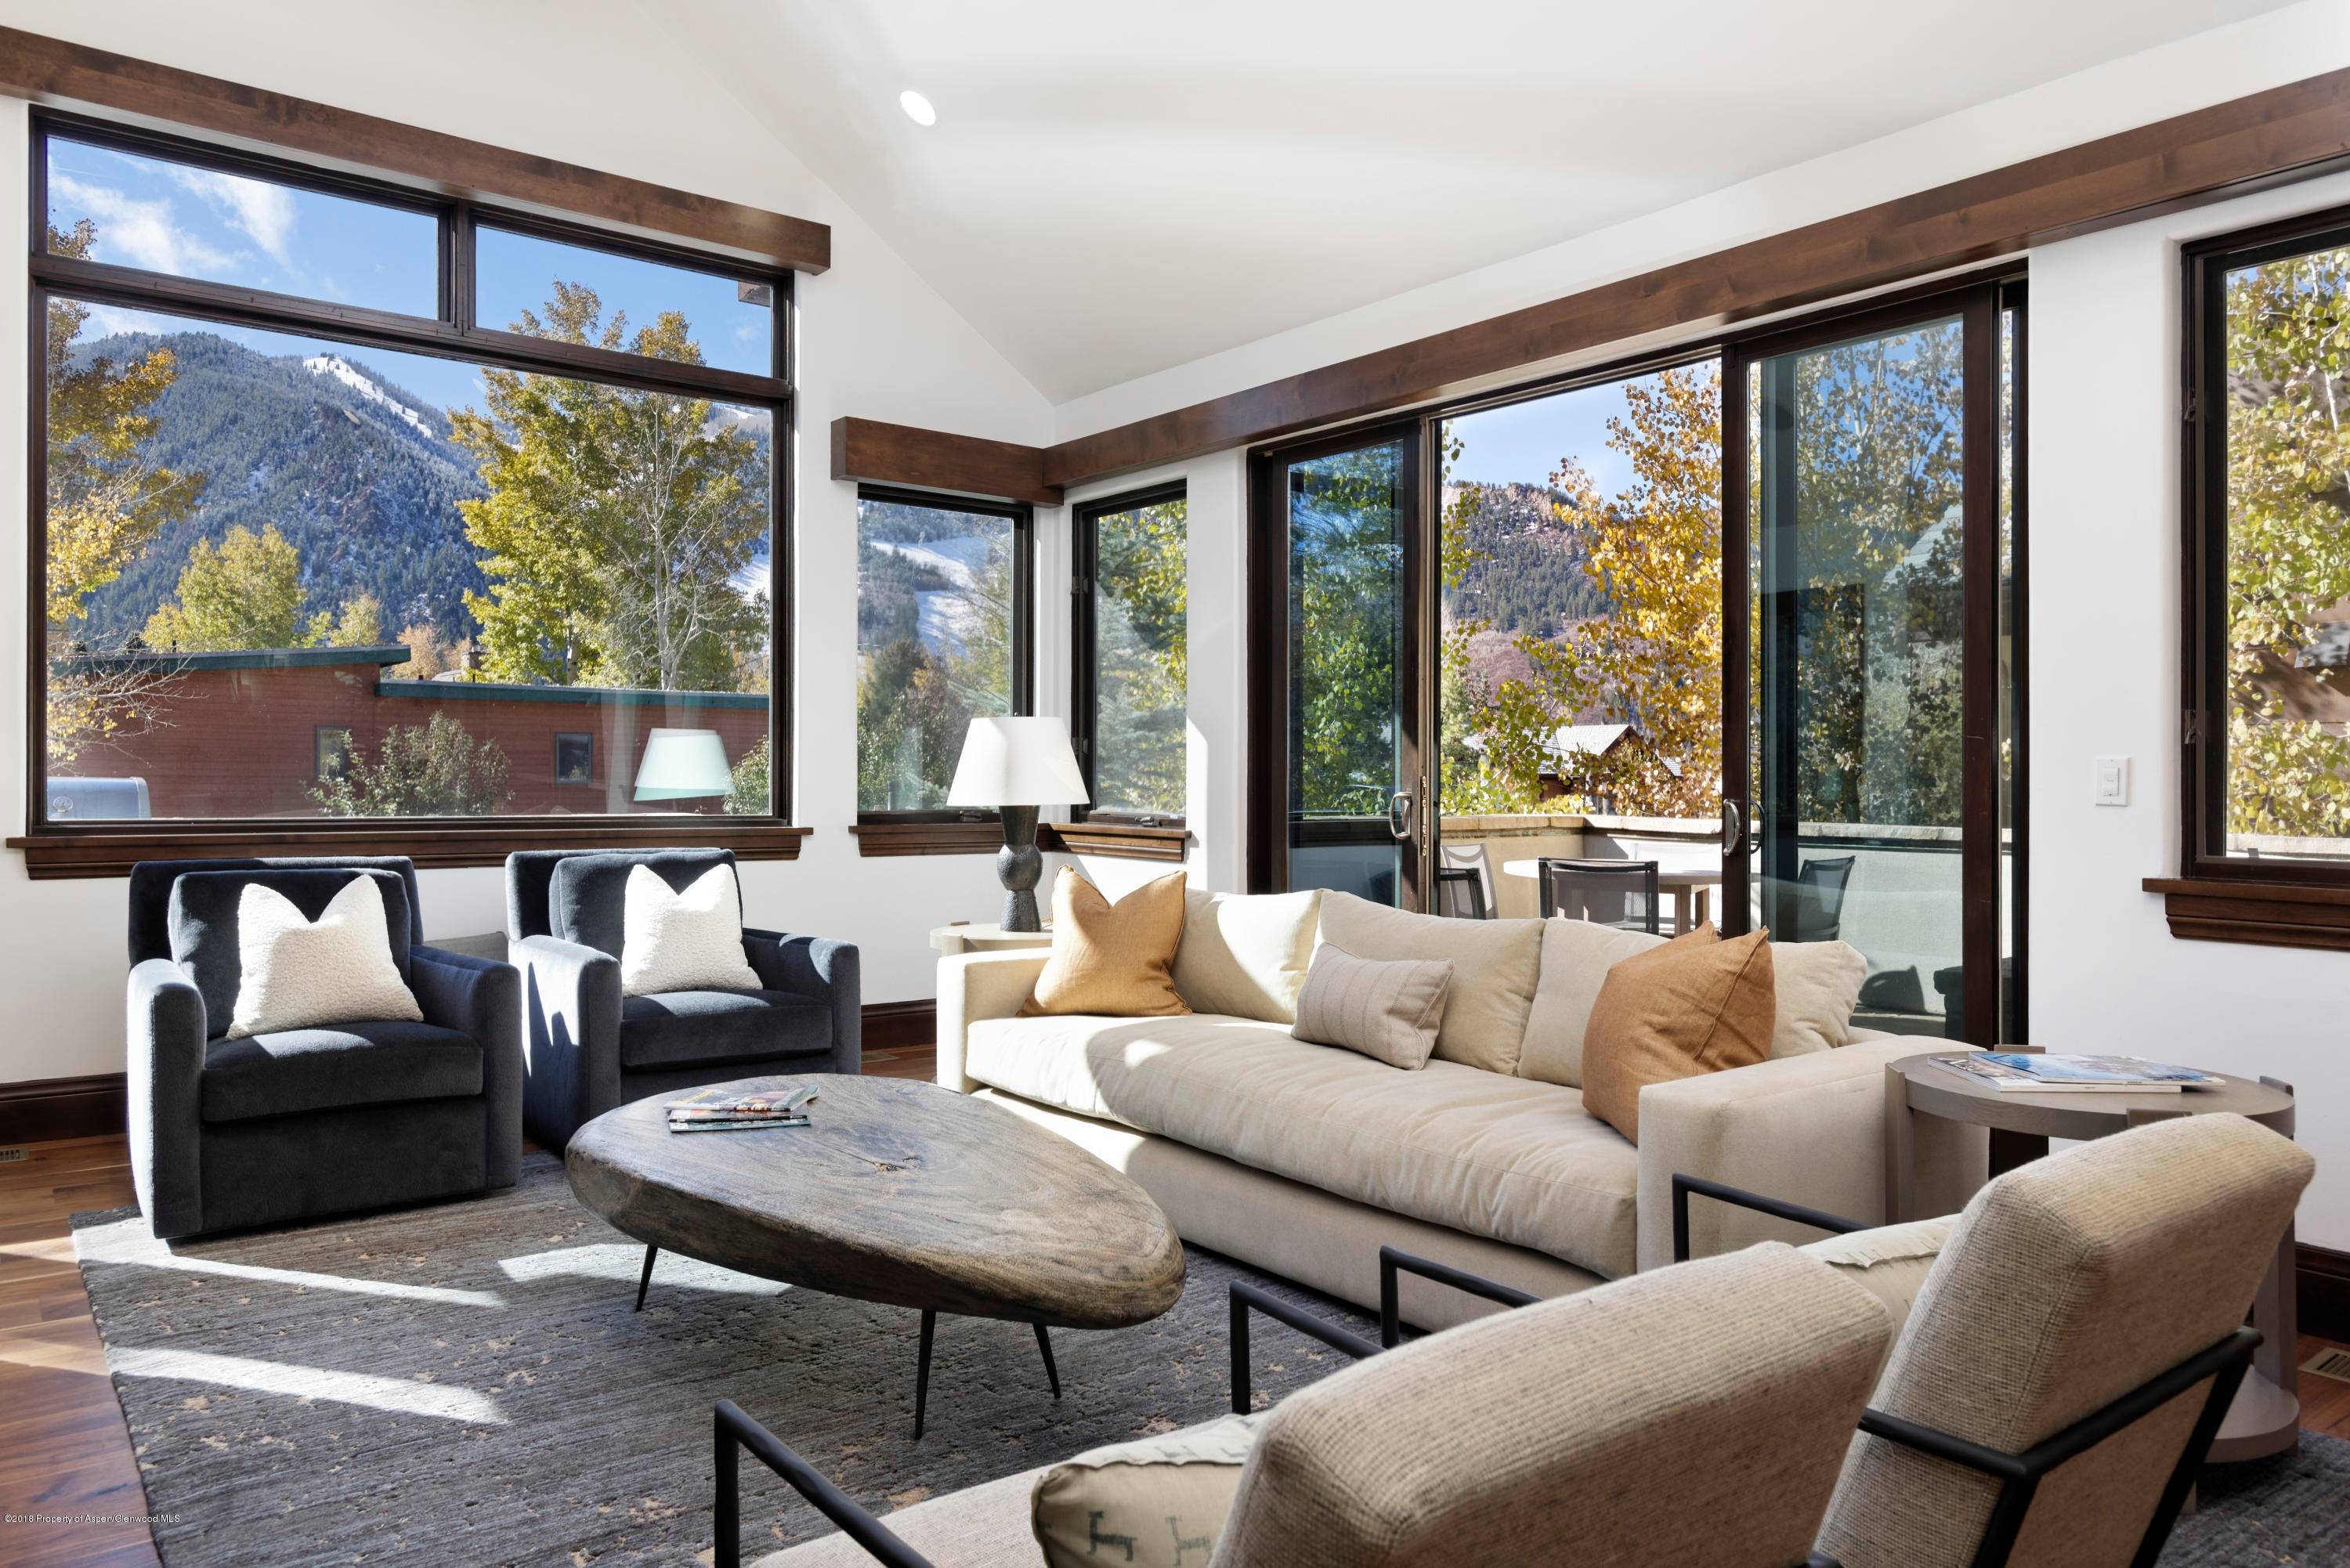 This Fox Crossing Mountain Contemporary home is a top notch property which located just minutes away from Aspen's downtown core.